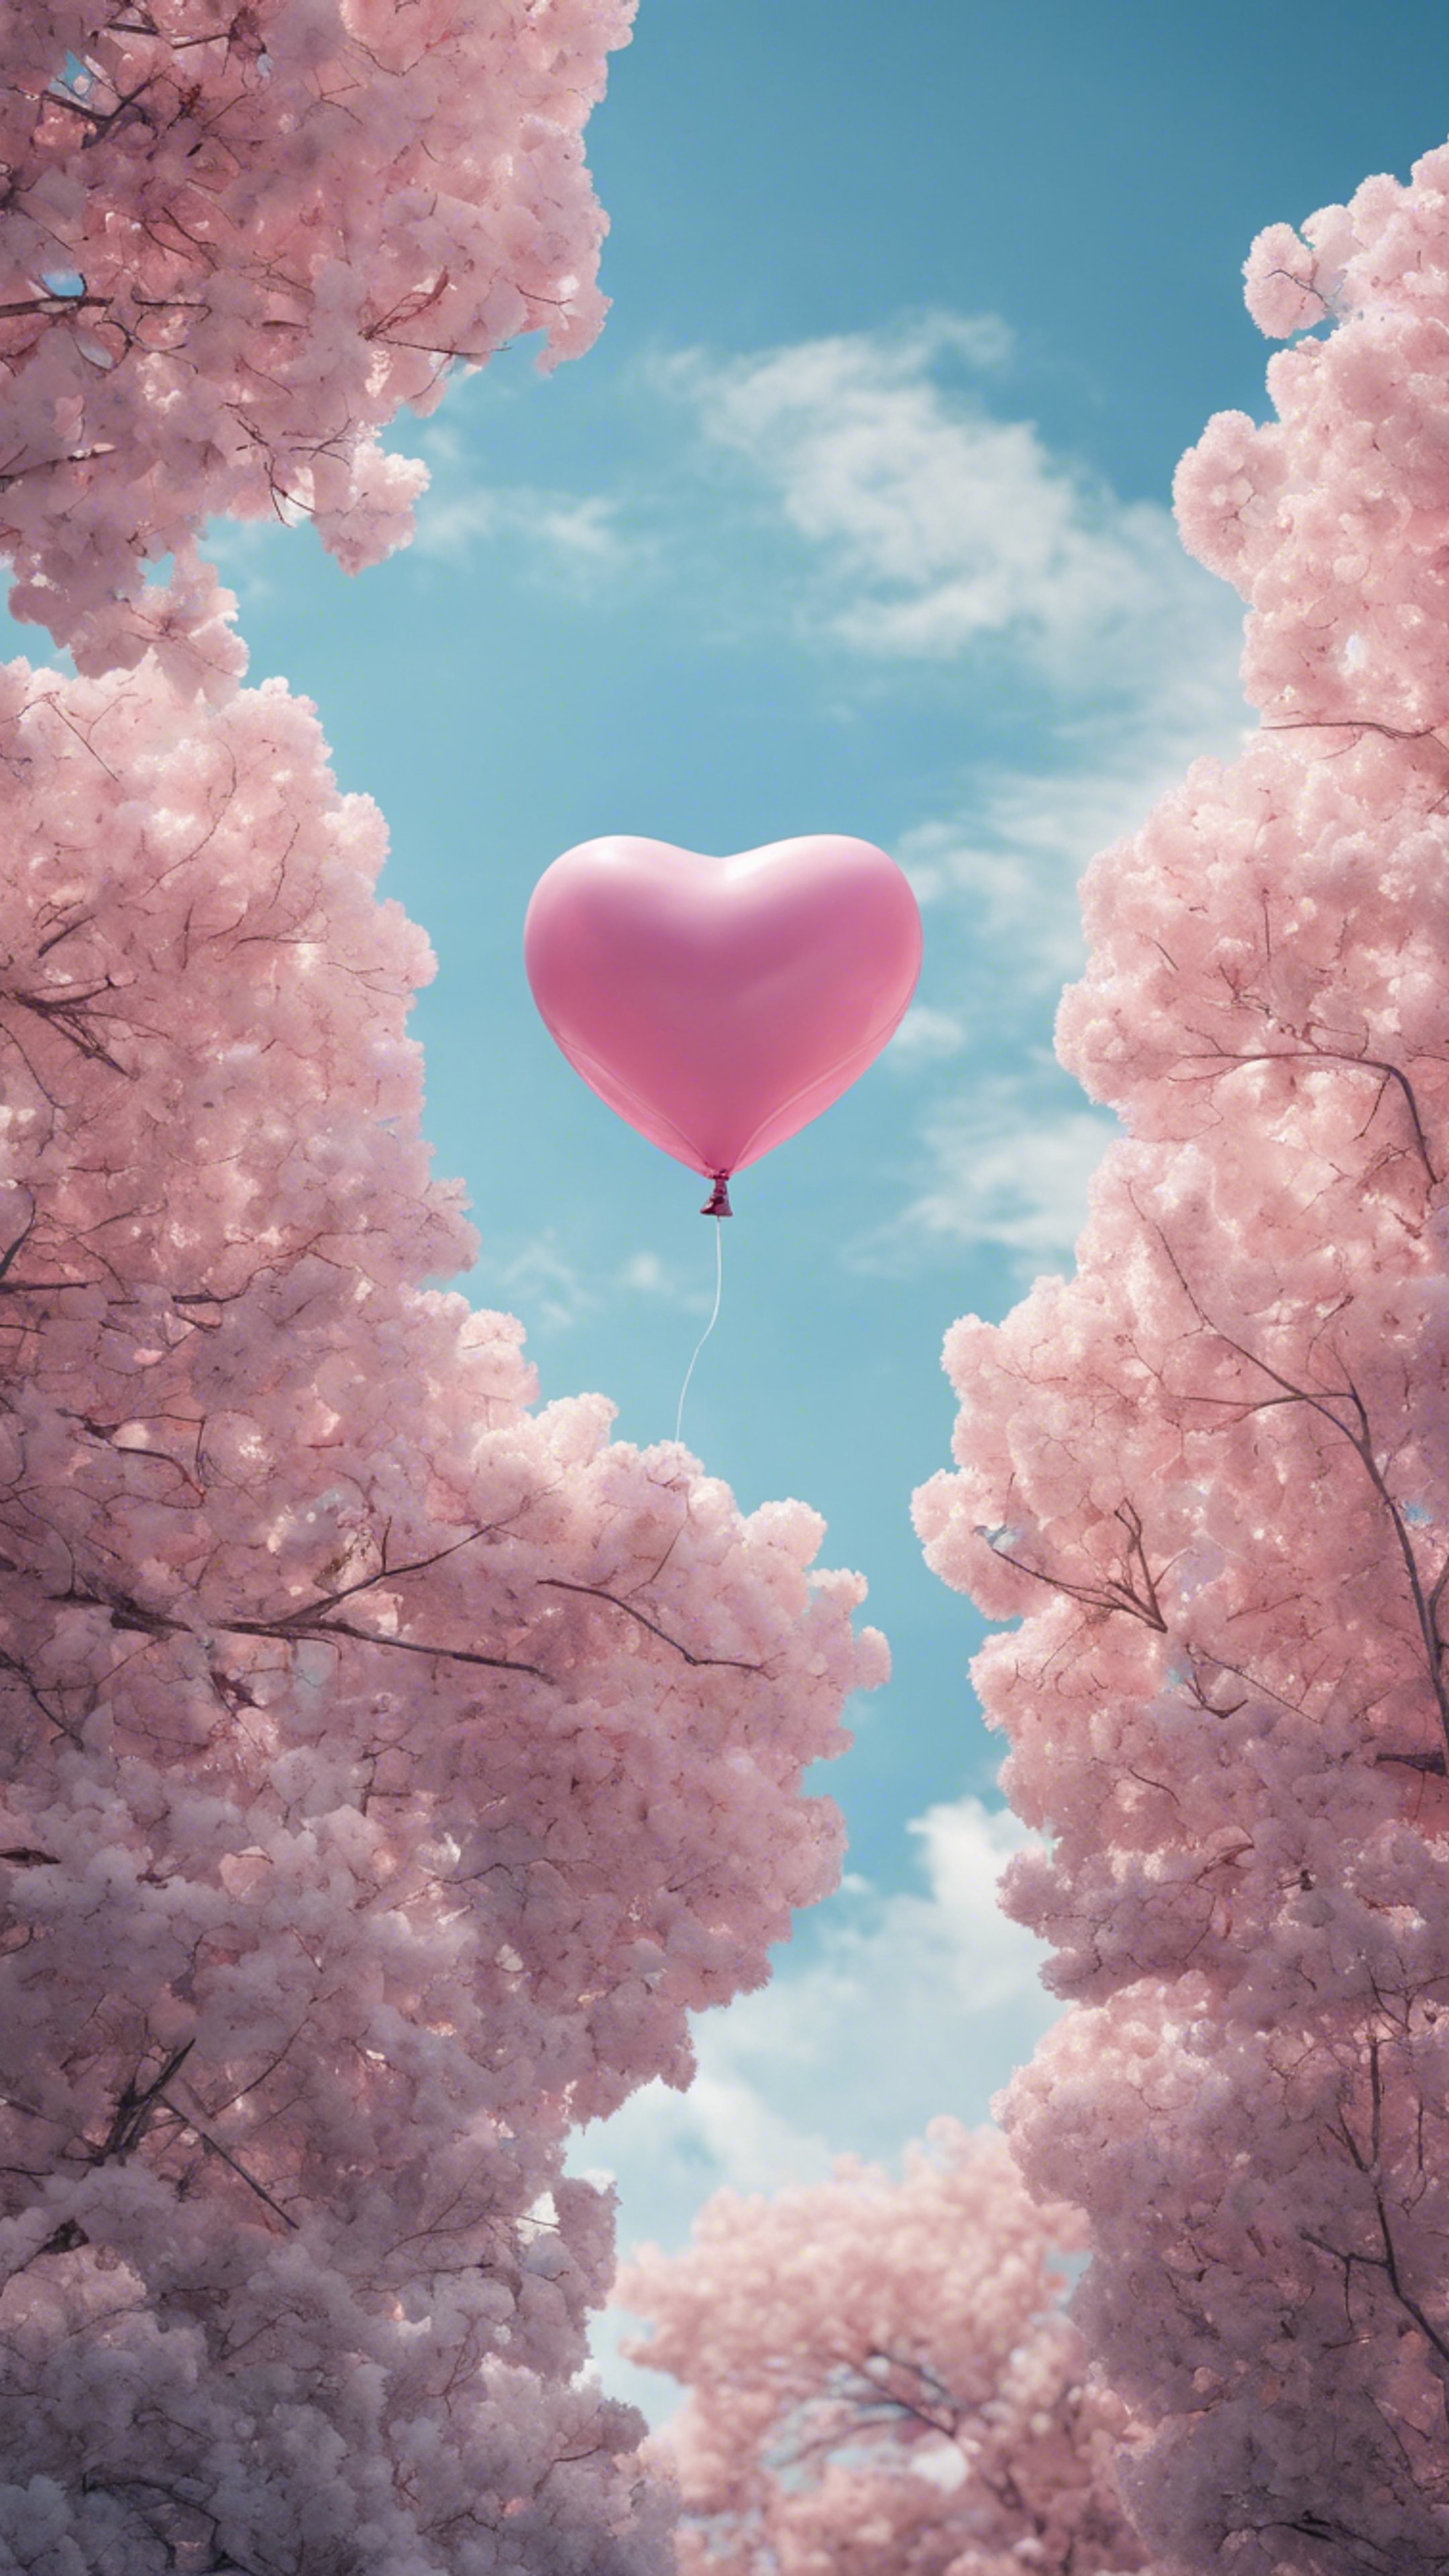 A pink heart-shaped balloon floating in the blue sky. Wallpaper[cd7c71404dc64bc7bb7c]